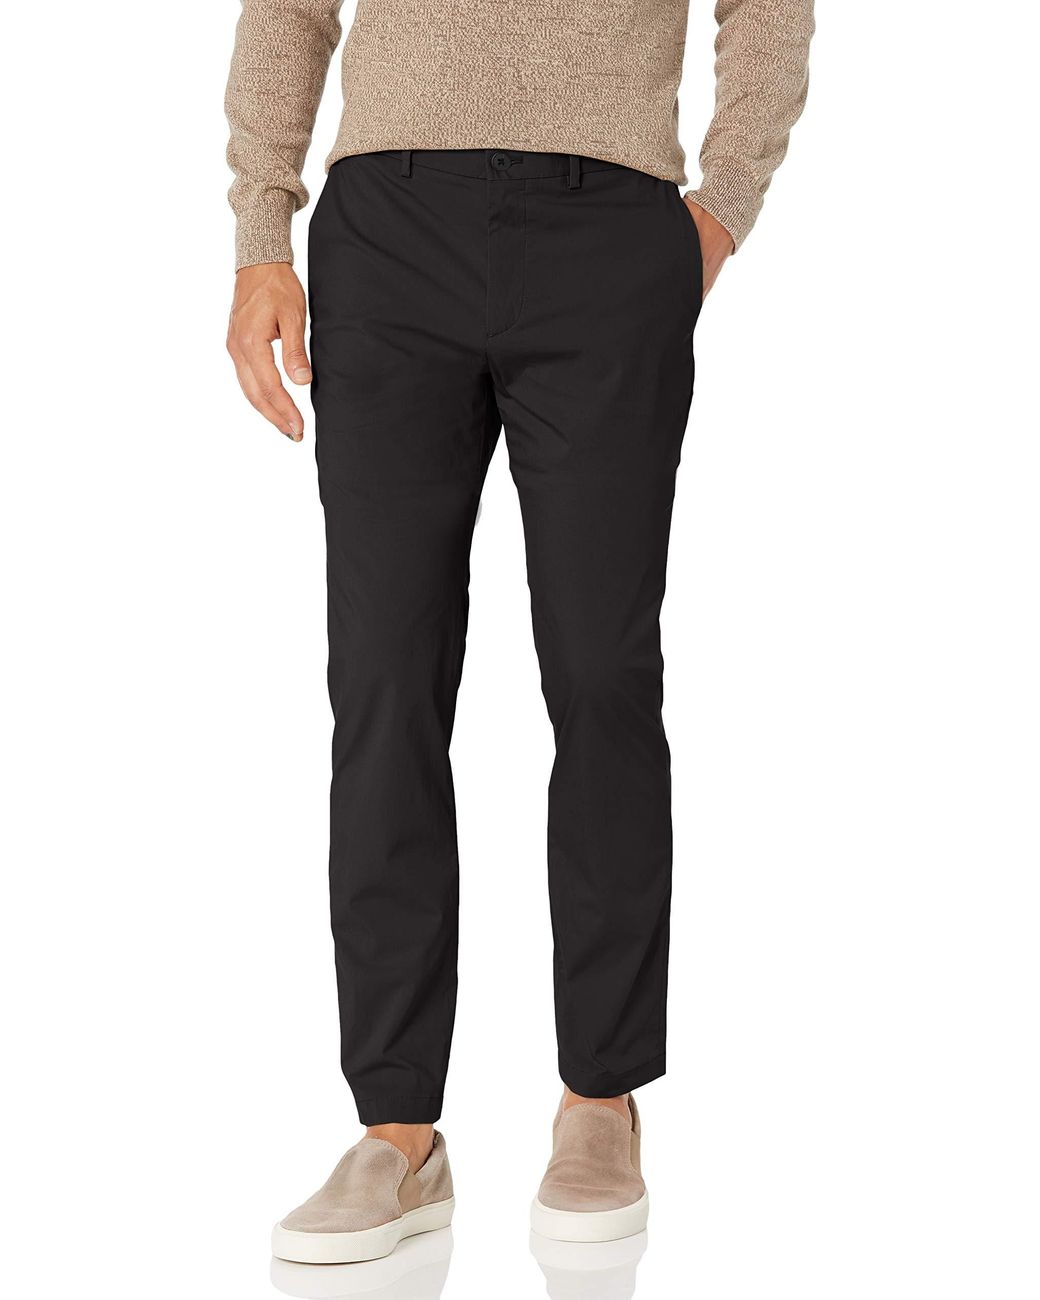 Theory Zaine Cotton Stretch Pants in Blue for Men - Lyst